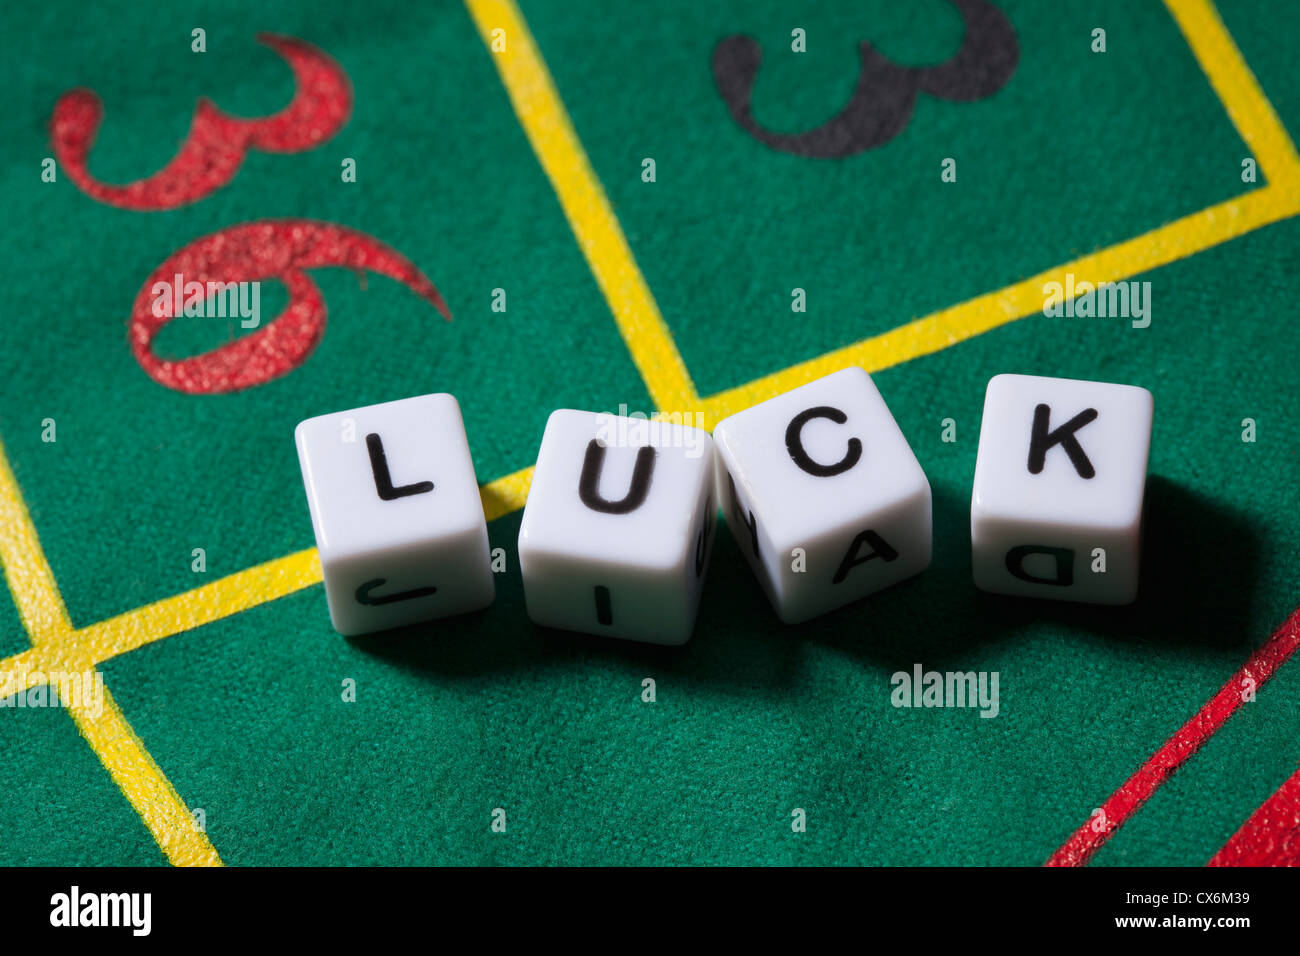 Dice on a gambling table spelling the word LUCK Stock Photo